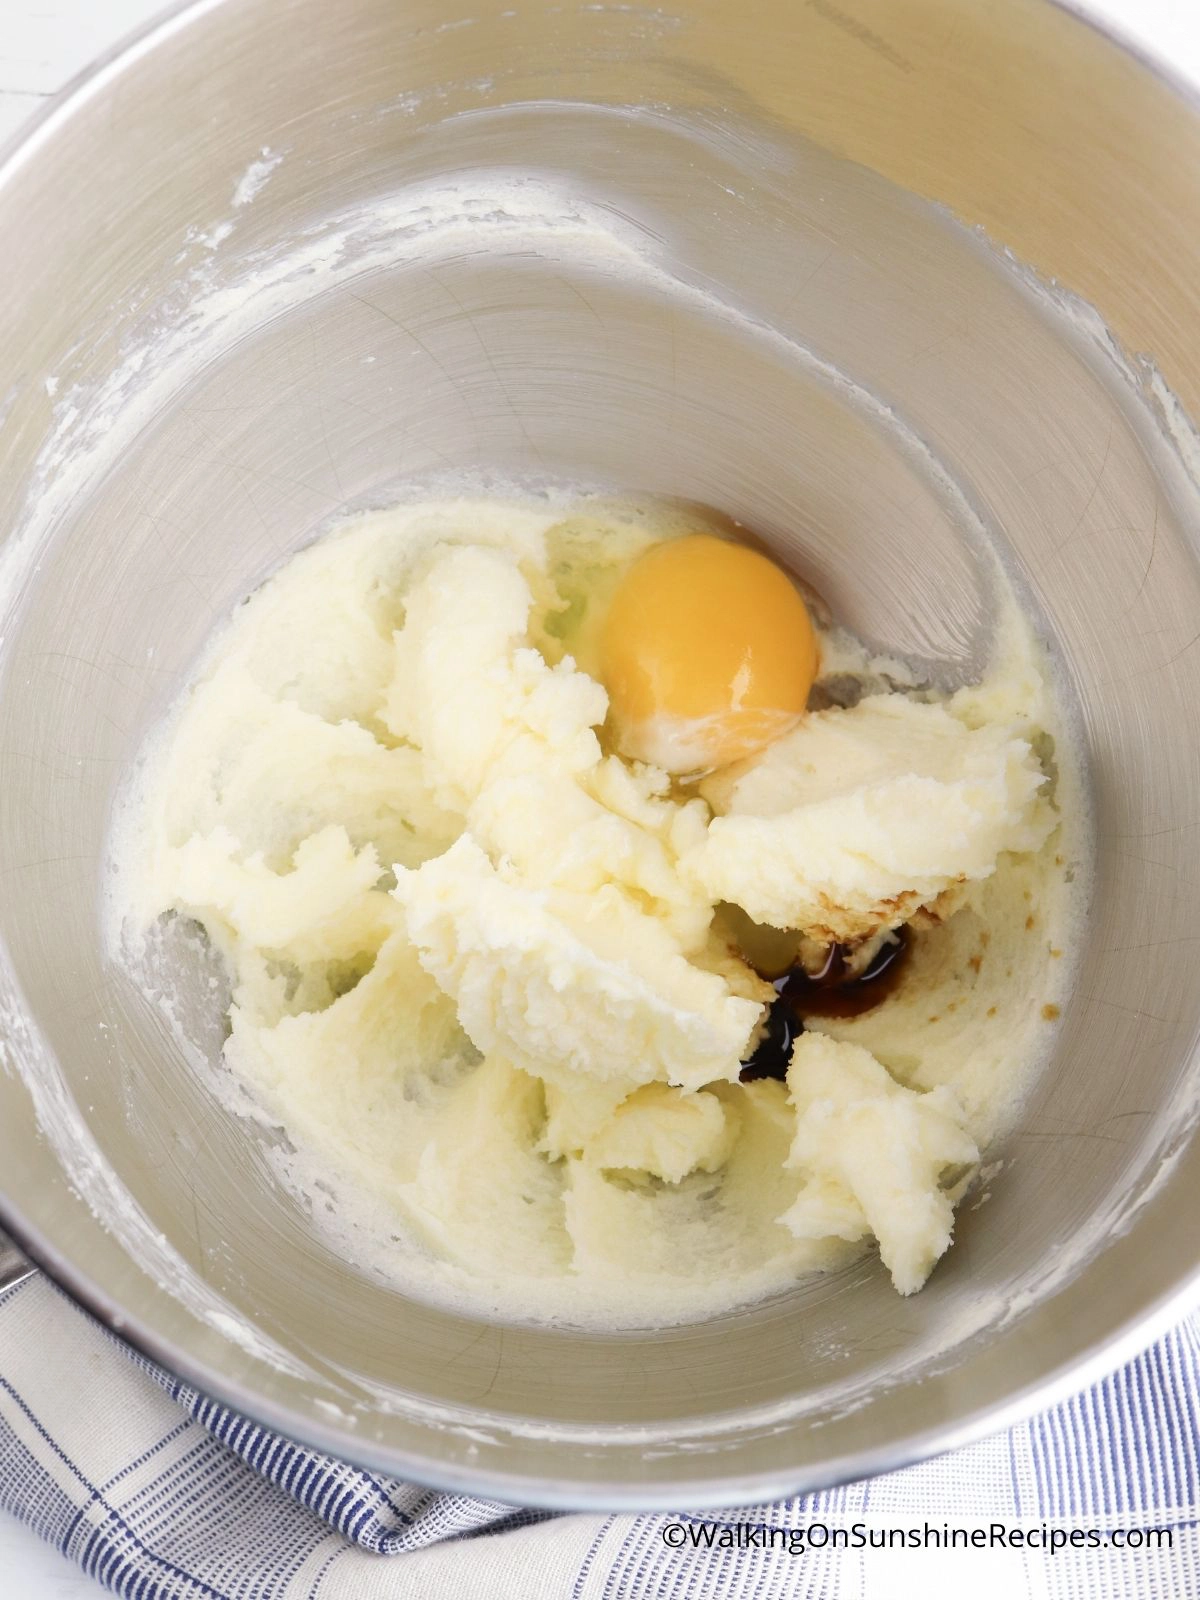 Creamed butter and eggs.